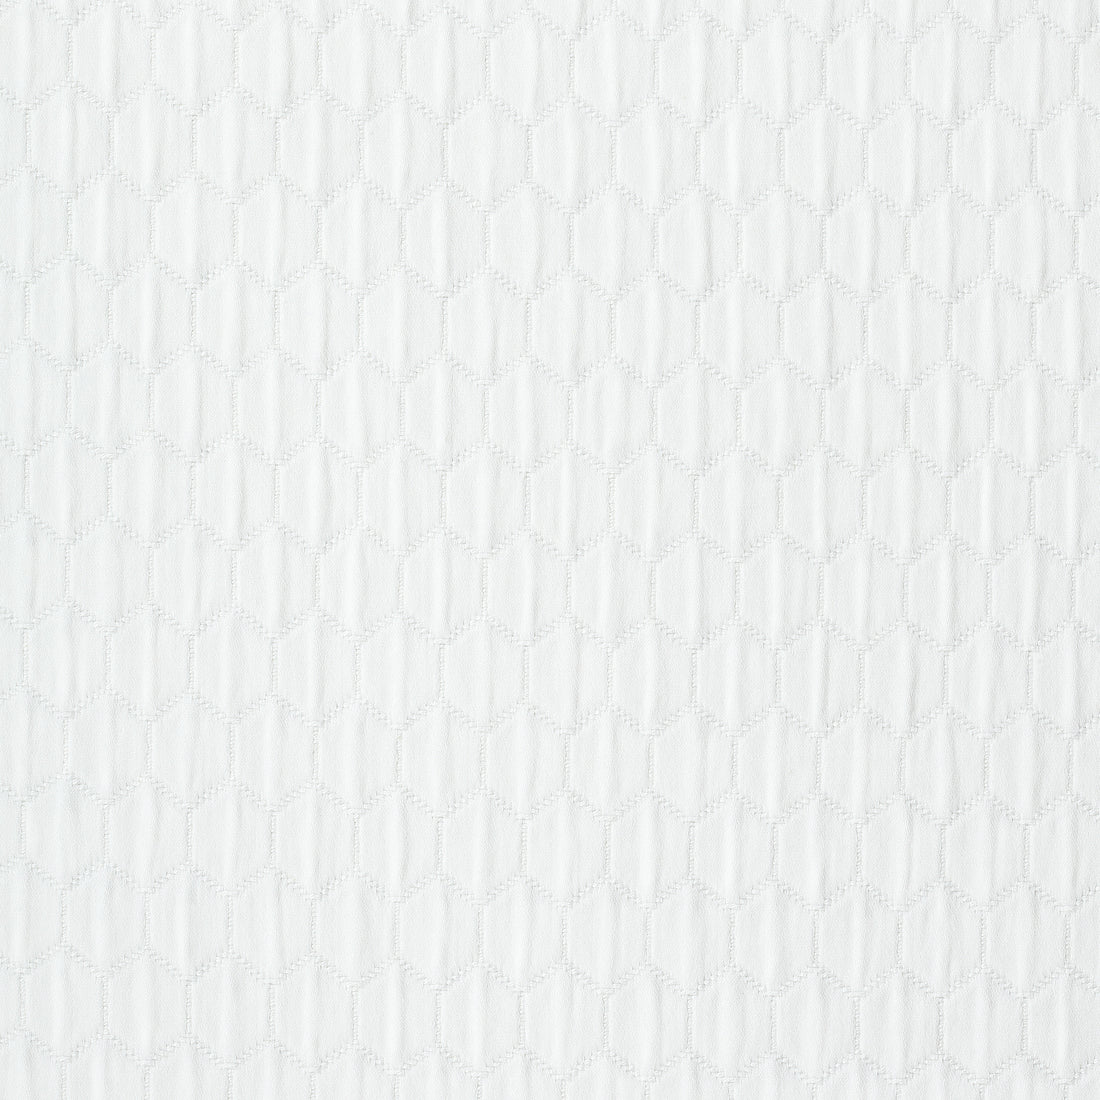 Beacroft Matelasse fabric in off white color - pattern number W772572 - by Thibaut in the Chestnut Hill collection